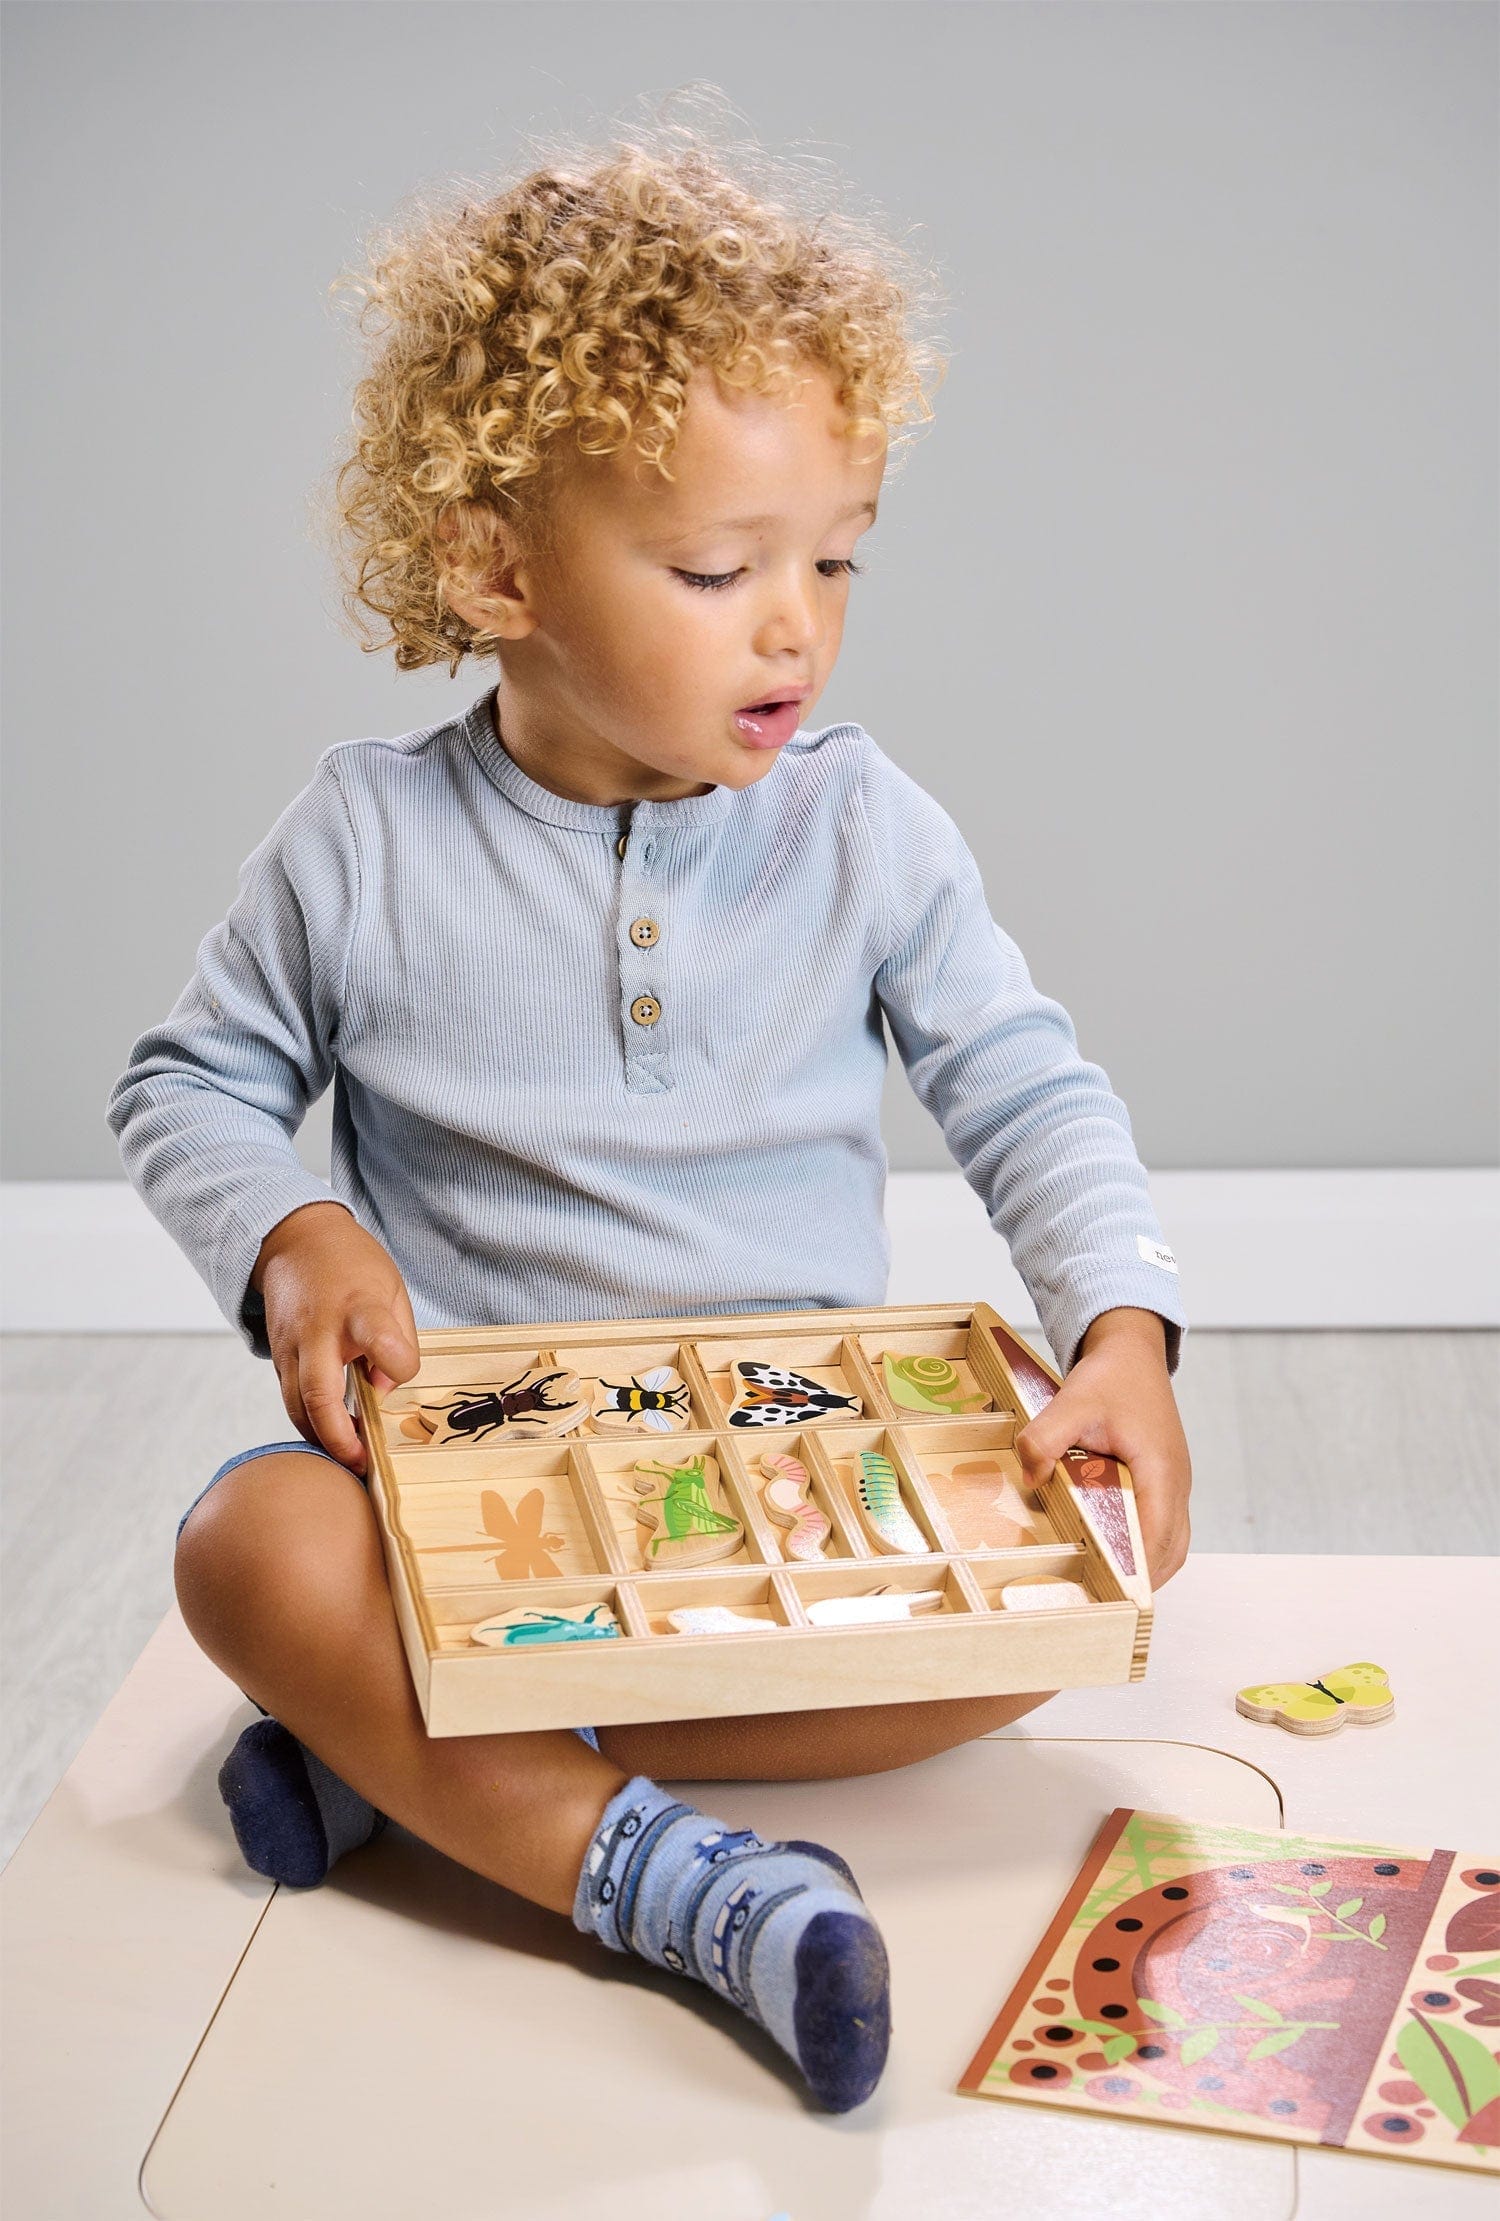 Tender Leaf Toys Toys The Bug Hotel Collection